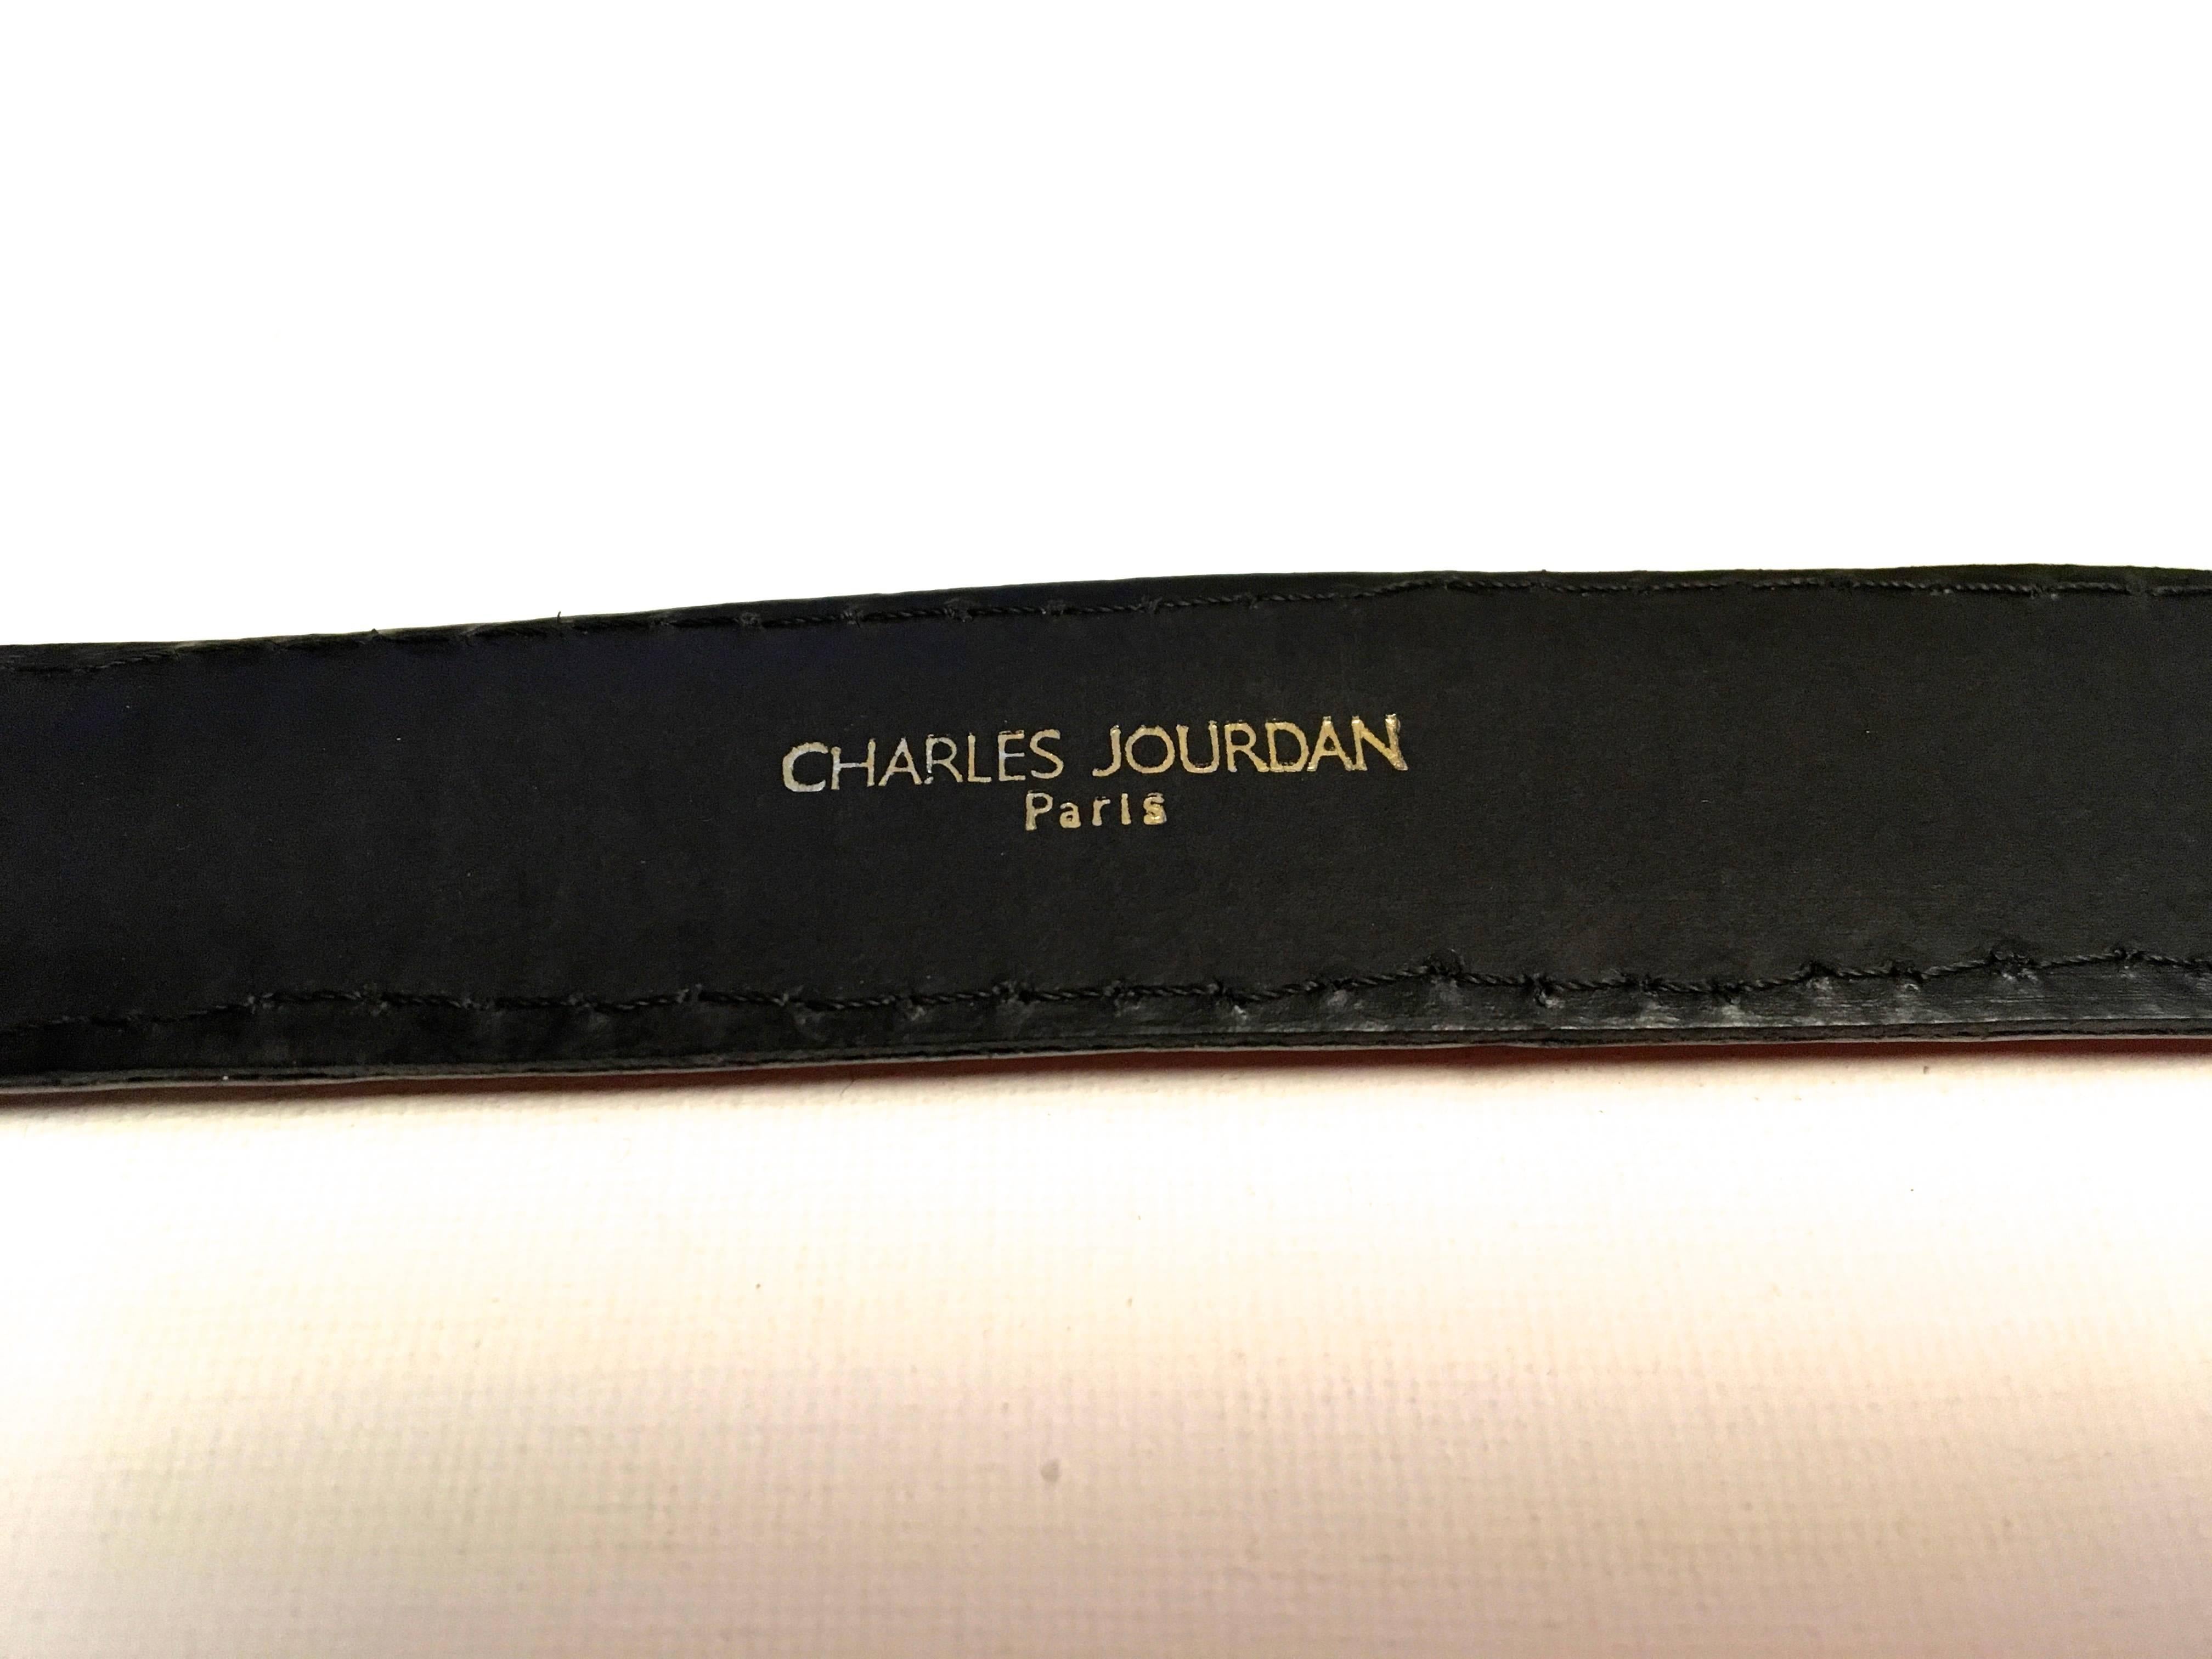 Presented here is a vintage Charles Jourdan belt. The belt is from the 1980's and is made from crocodile. The belt is black and has been fully restored by professionals to where the belt is almost brand new. The full restoration to the belt has made